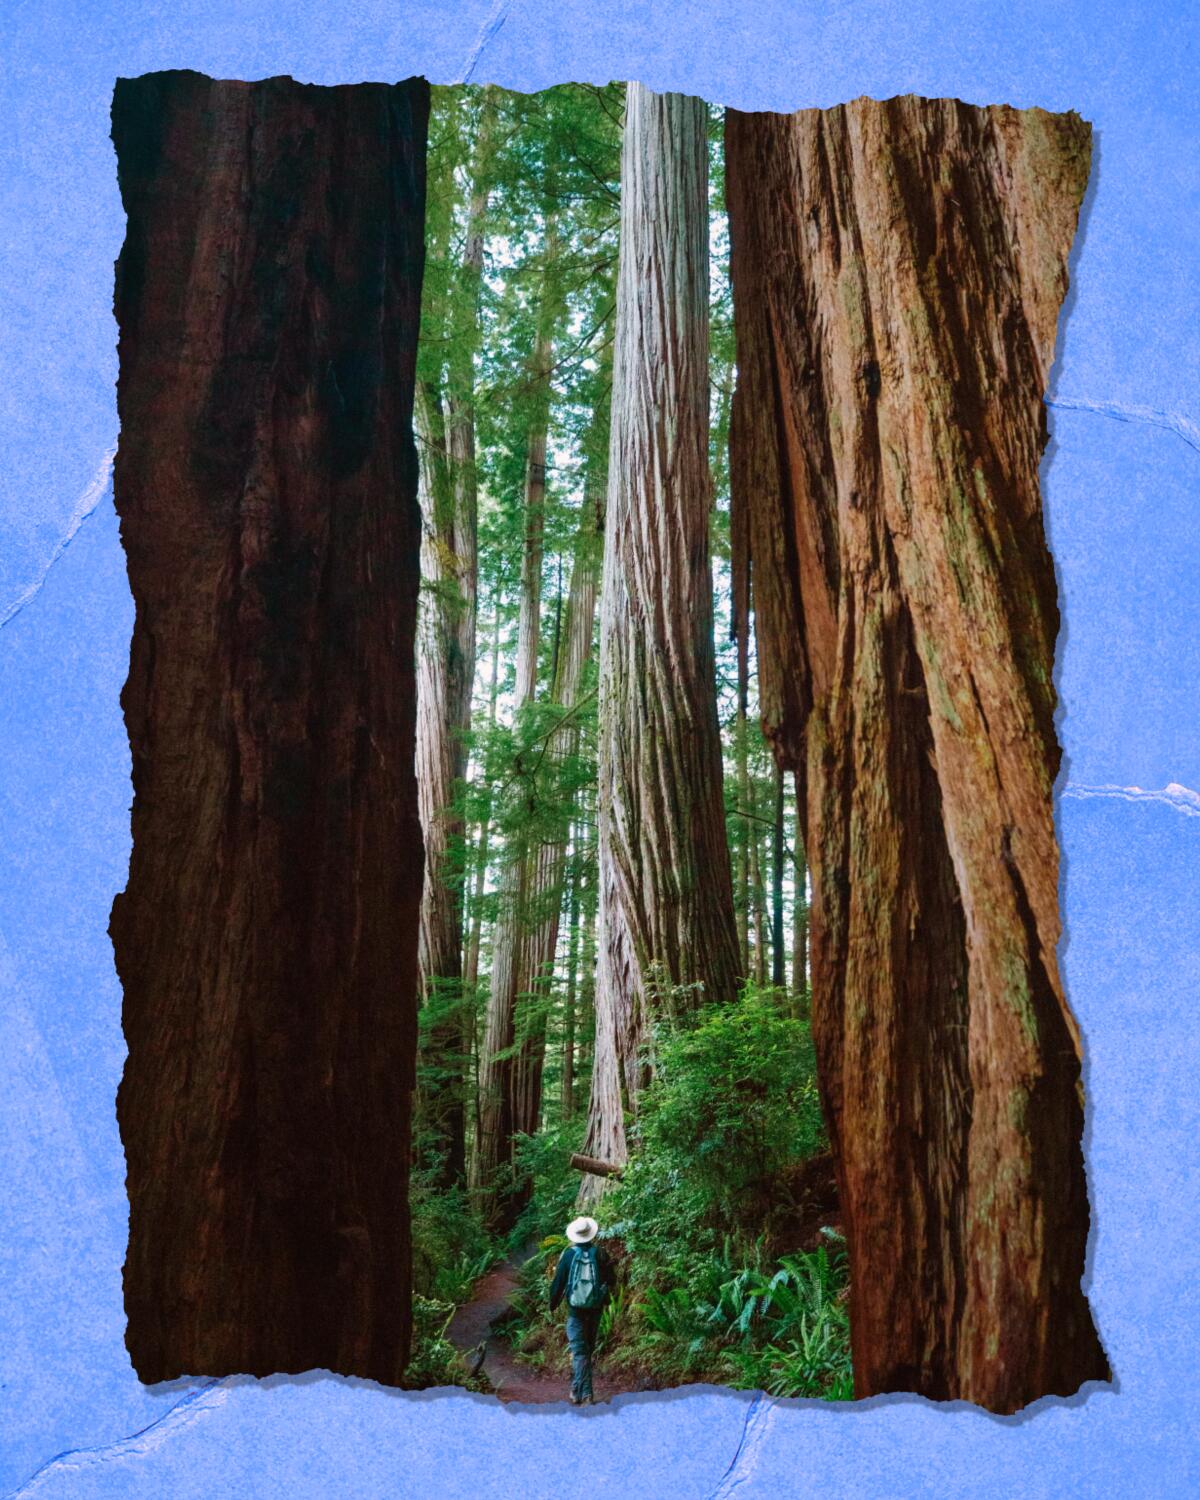 A person in a hat and wearing a backpack is seen amid the trunks of huge trees.